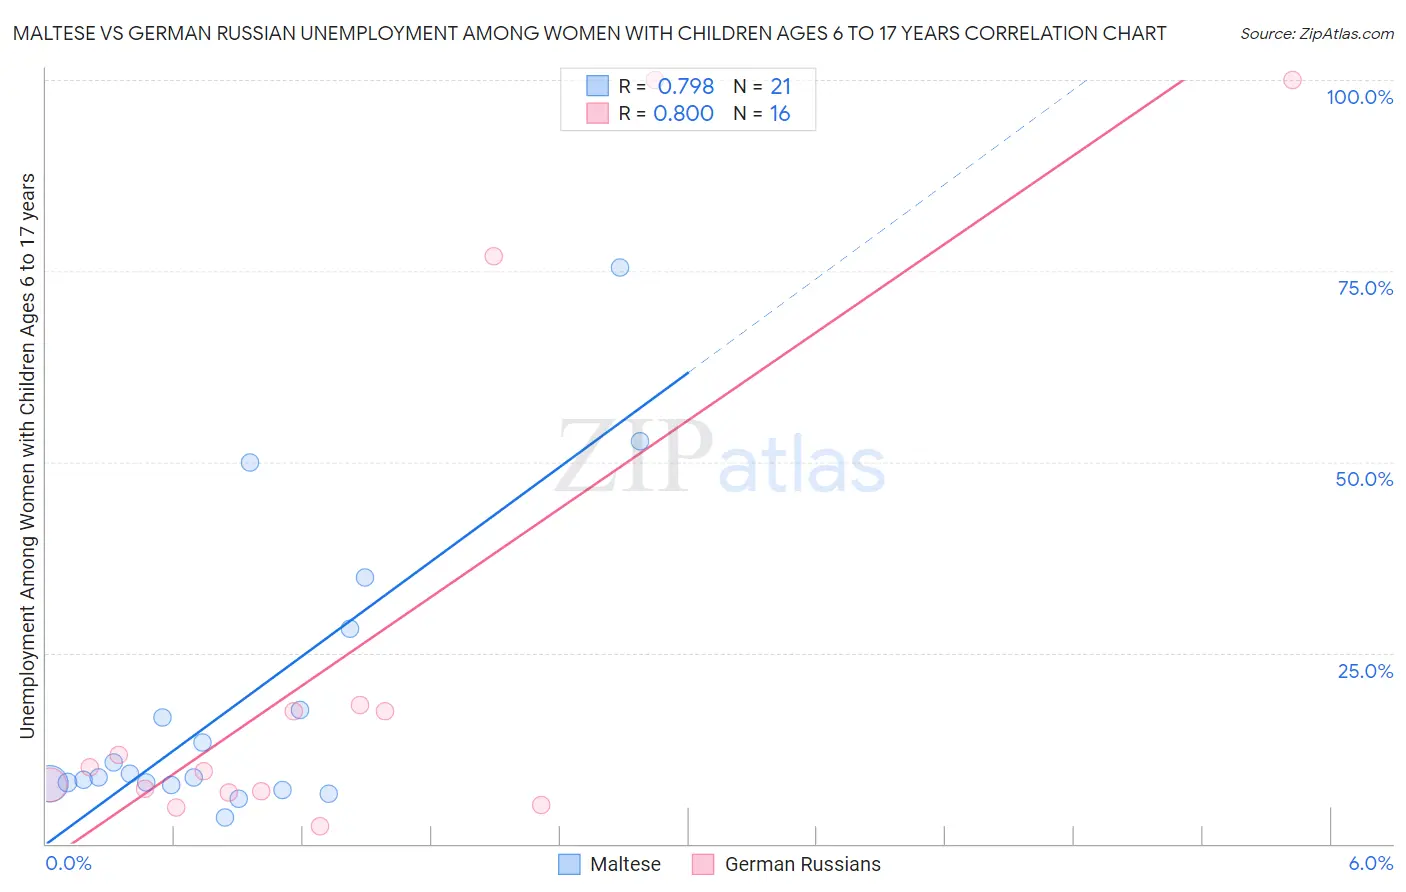 Maltese vs German Russian Unemployment Among Women with Children Ages 6 to 17 years